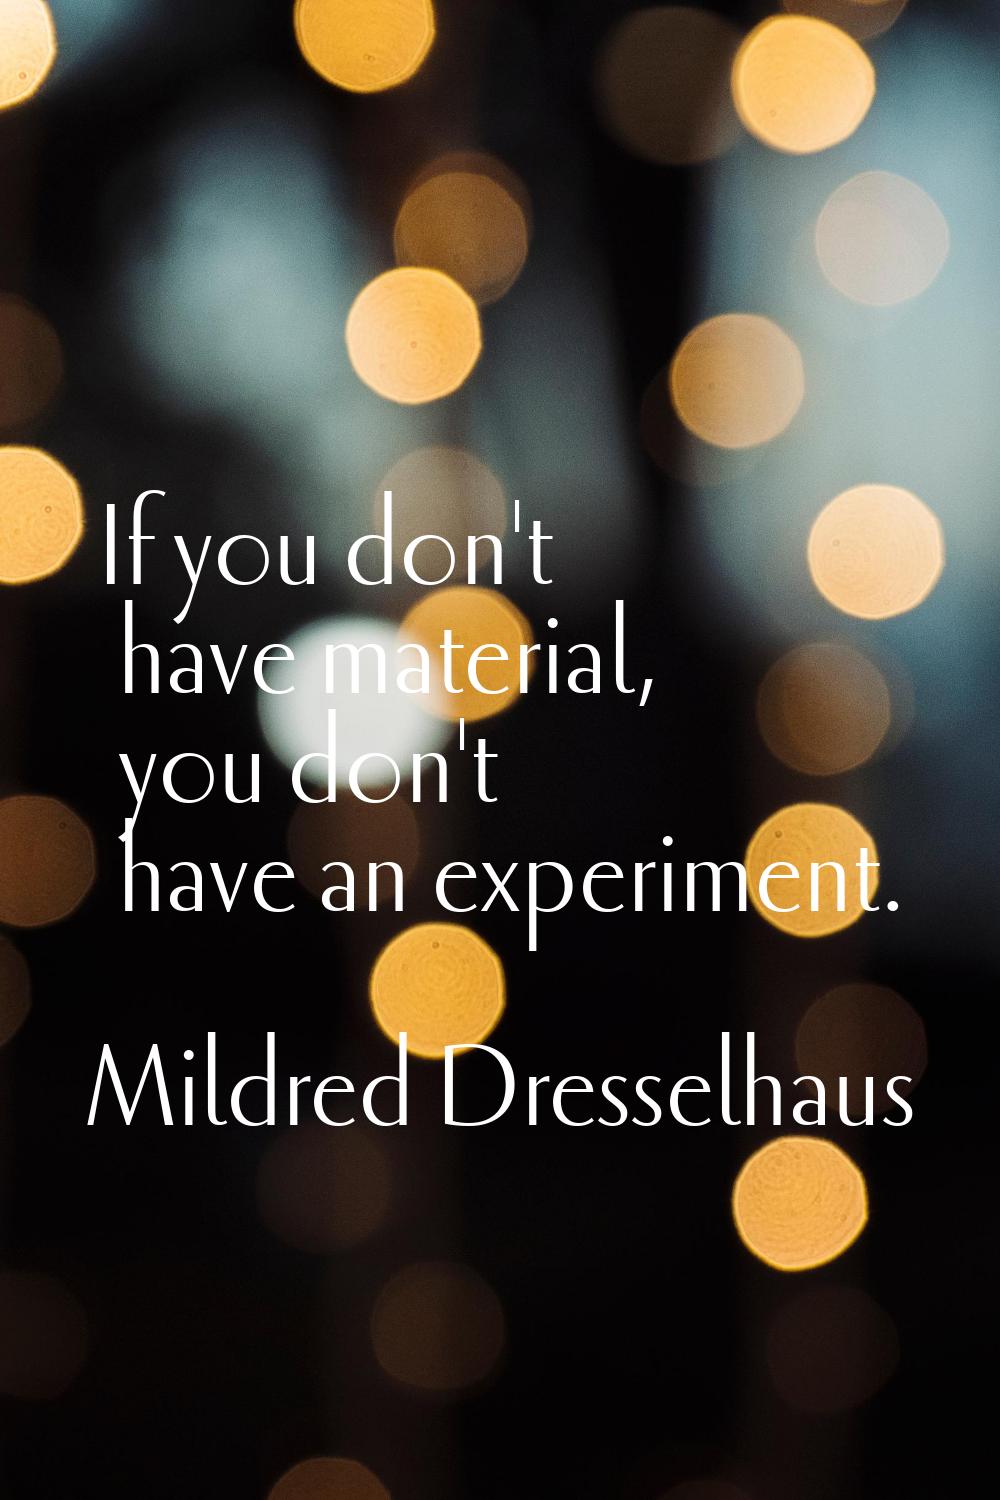 If you don't have material, you don't have an experiment.